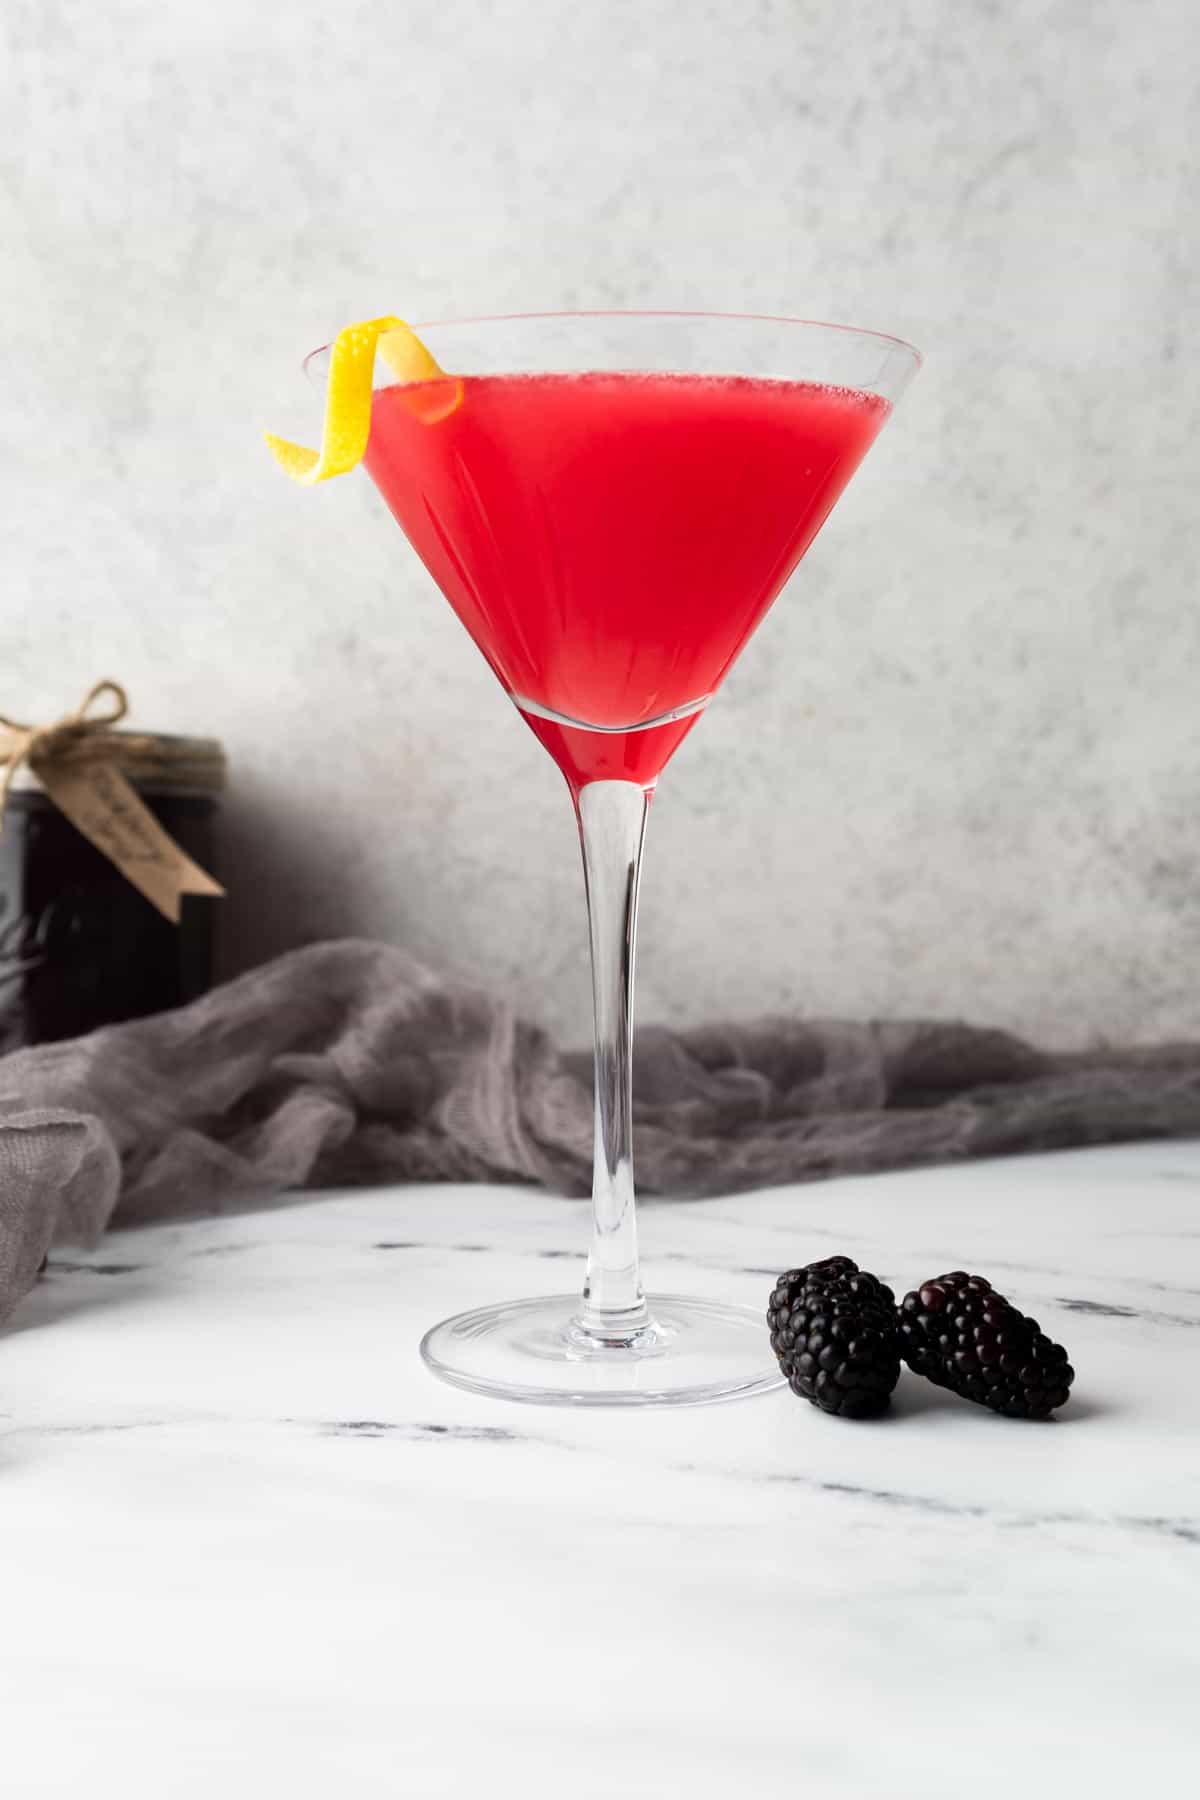 A martini glass filled with a blackberry lemon drop martini